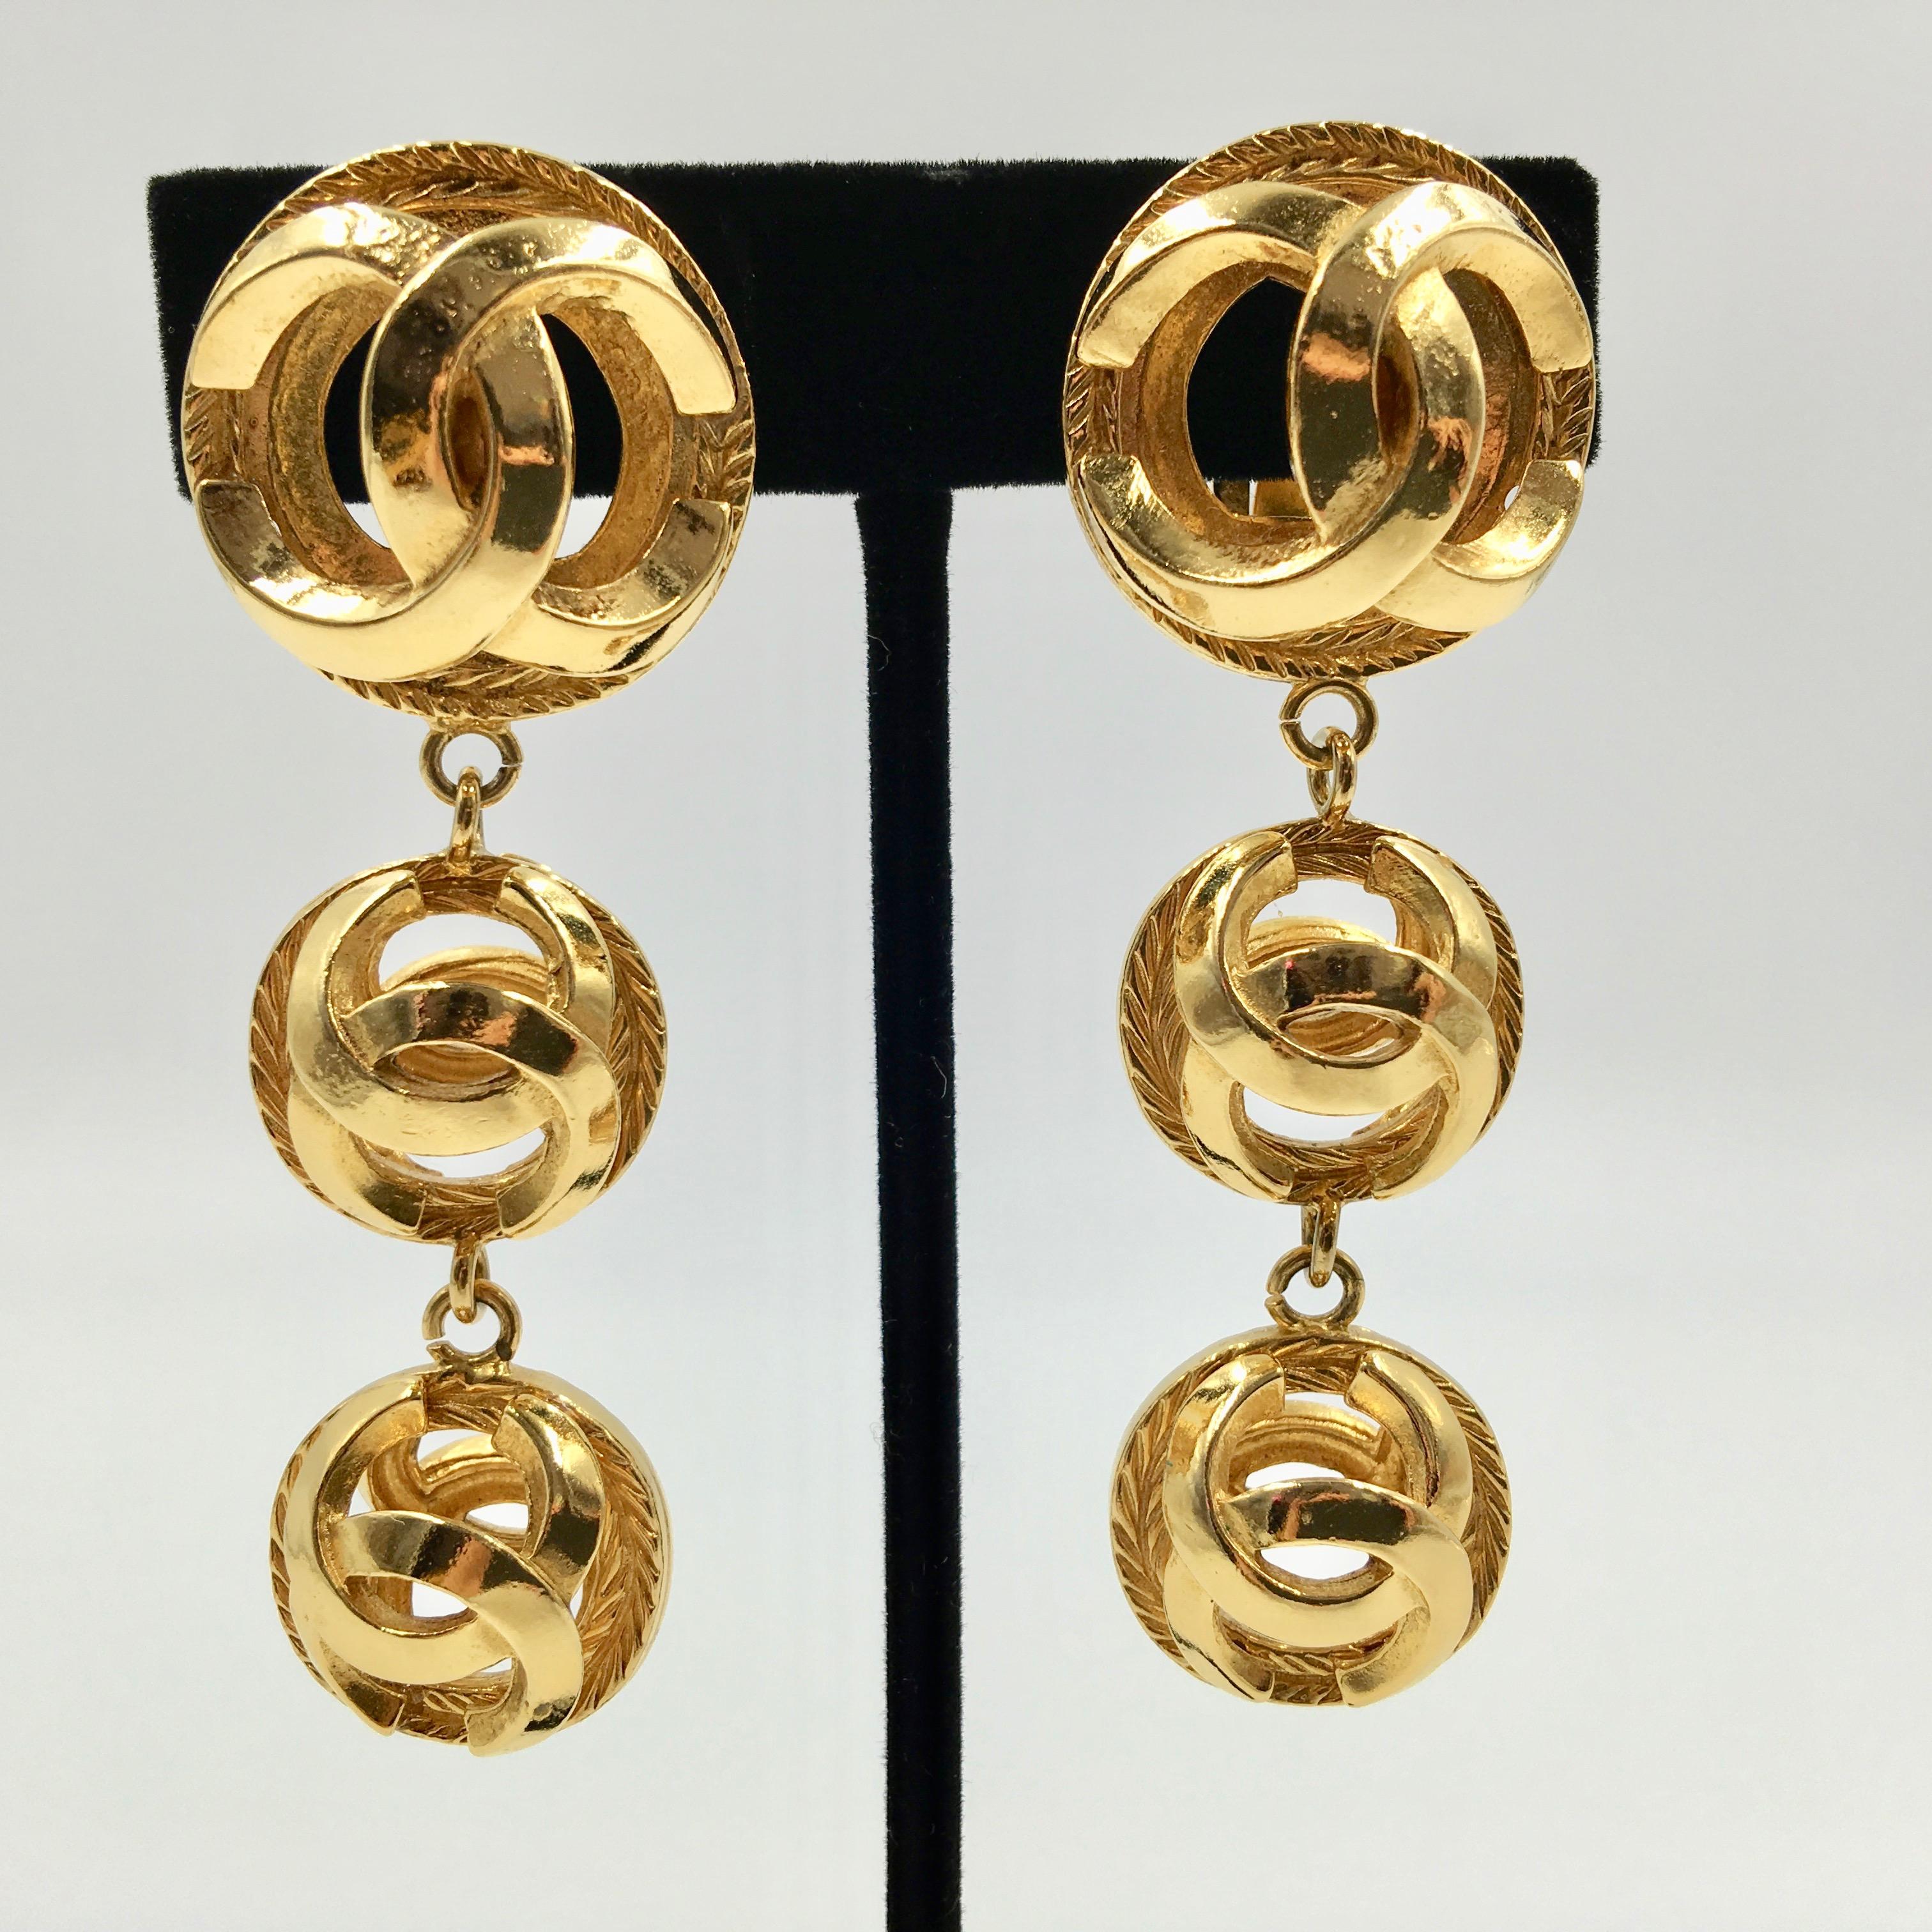 Chanel Gold Tone CC Logo Drop Clip On Earrings. Stamped Chanel. In very good vintage condition.

Measurements are as follows:
Length- 2 3/4